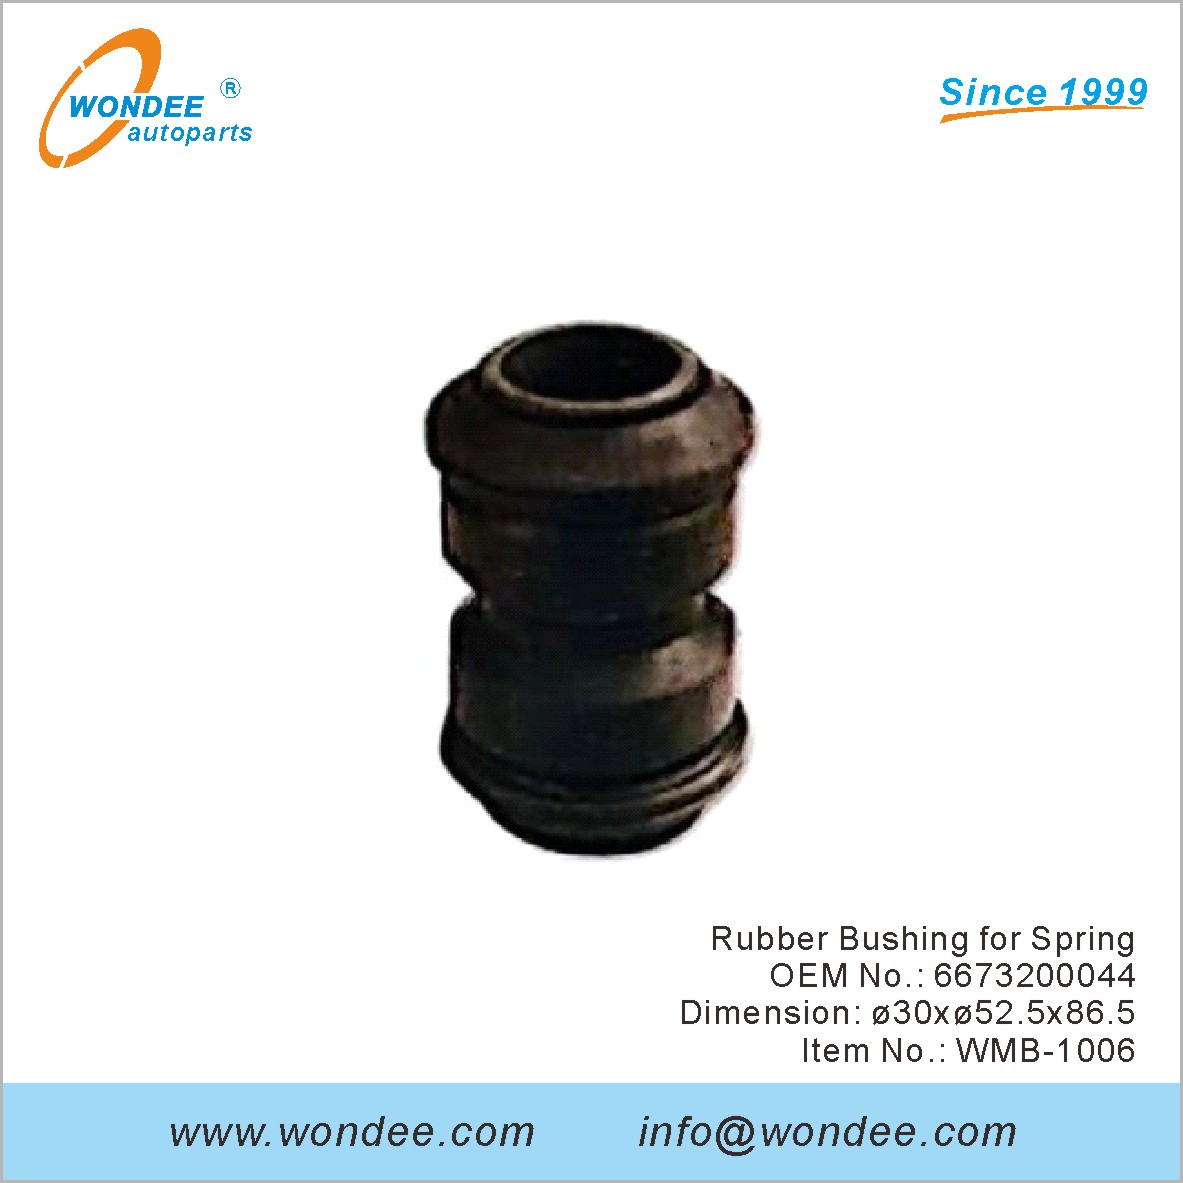 Rubber Bushing for Spring OEM 6673200044 for Benz from WONDEE